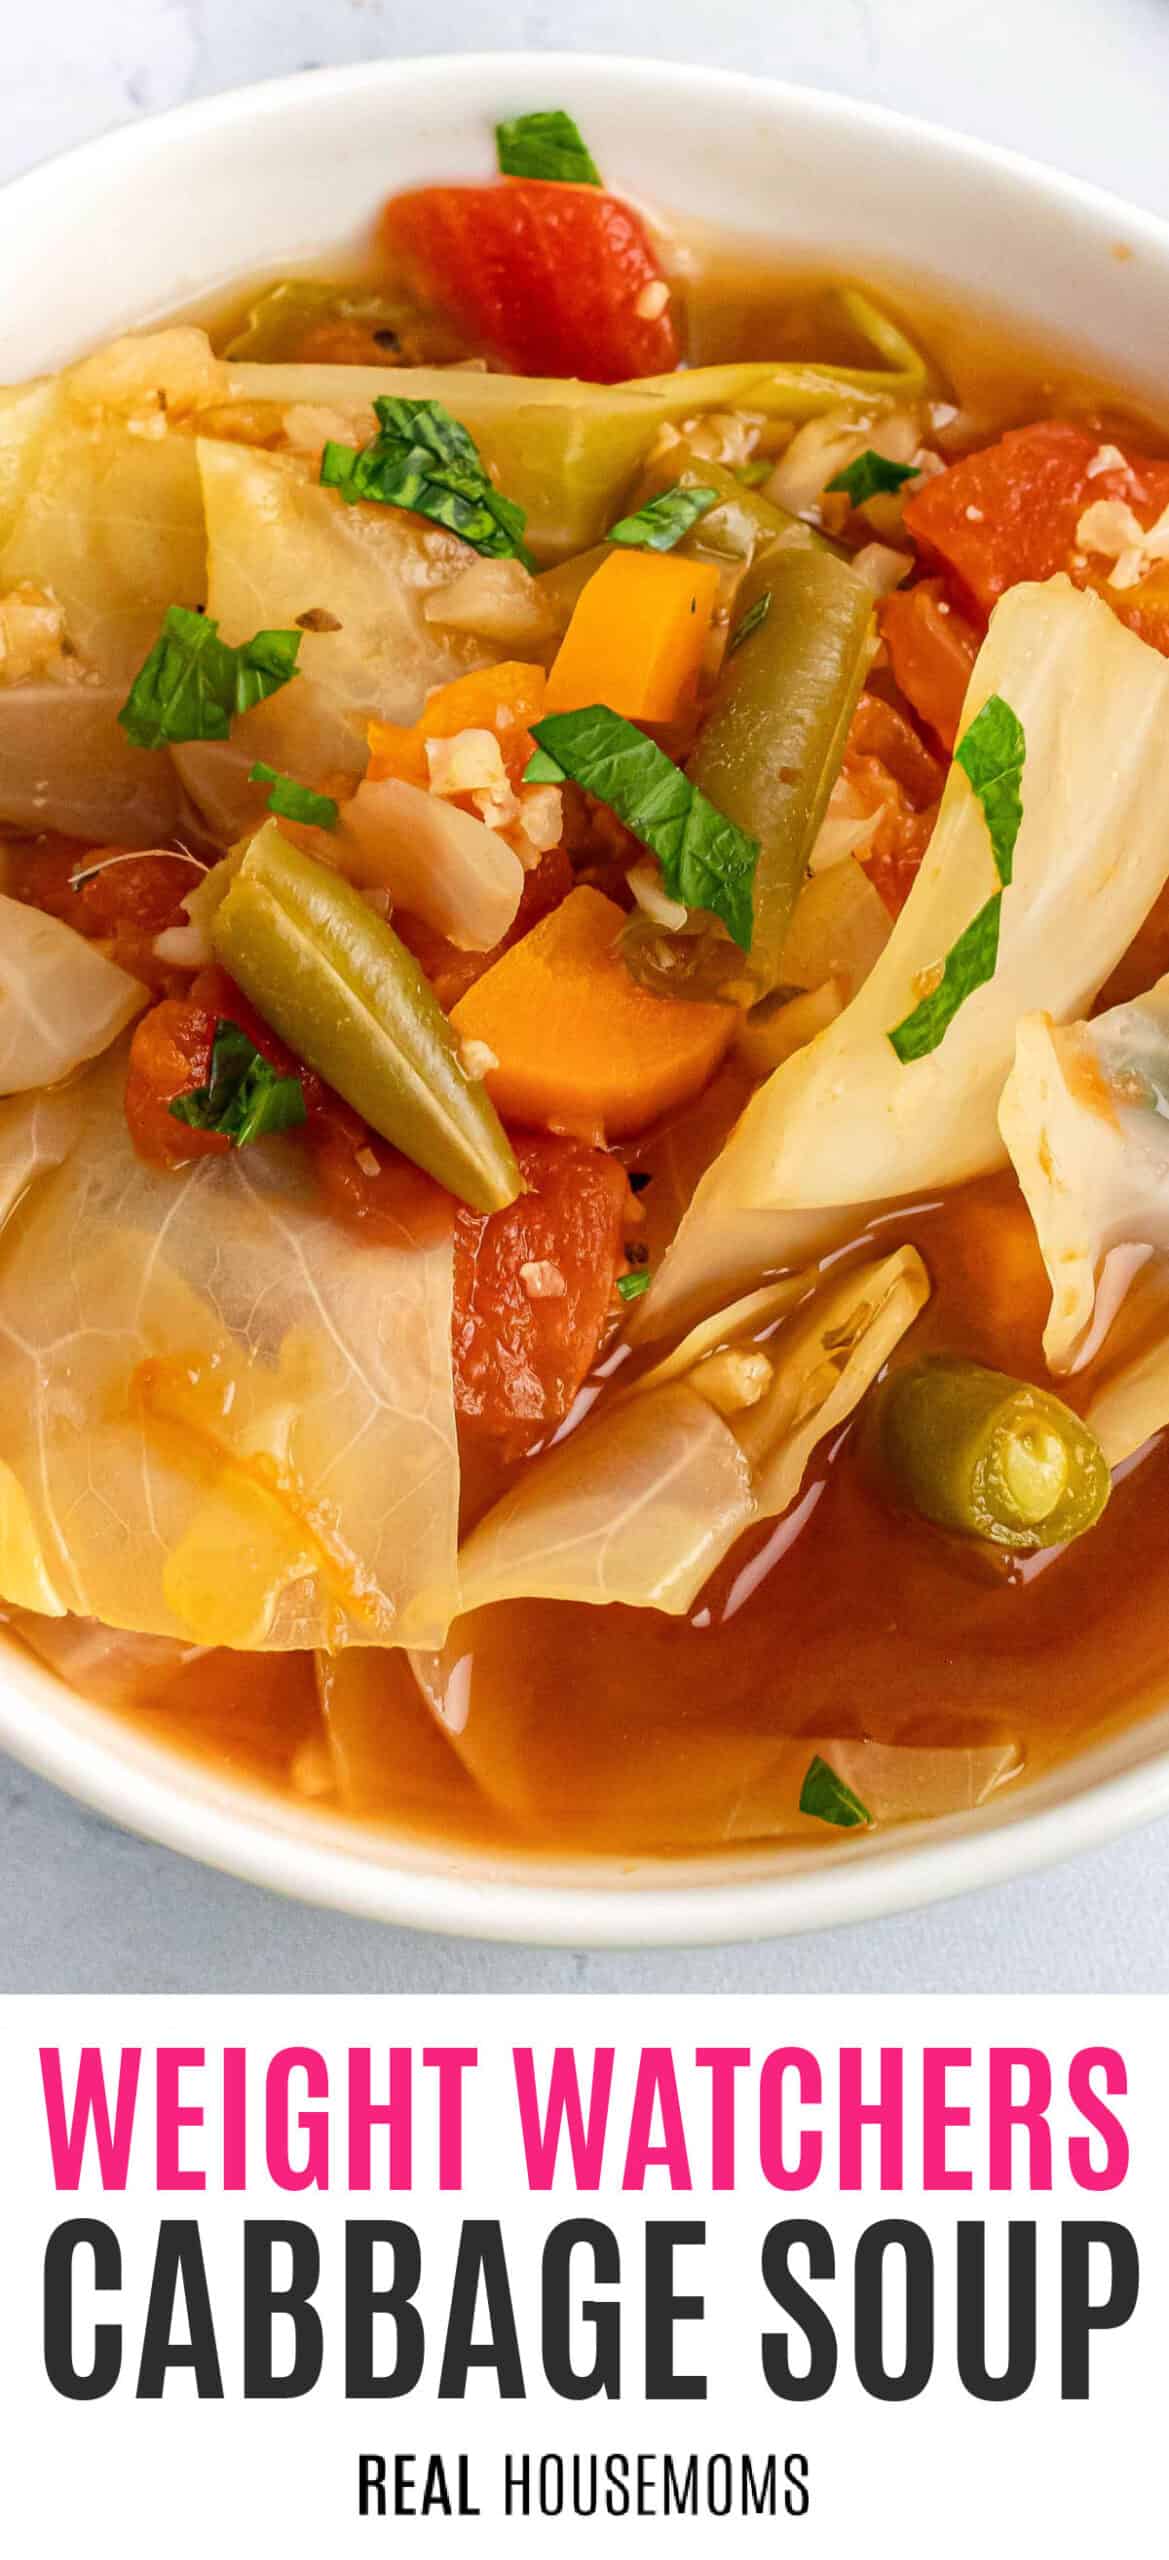 https://realhousemoms.com/wp-content/uploads/Weight-Watchers-Cabbage-Soup-HERO-scaled.jpg